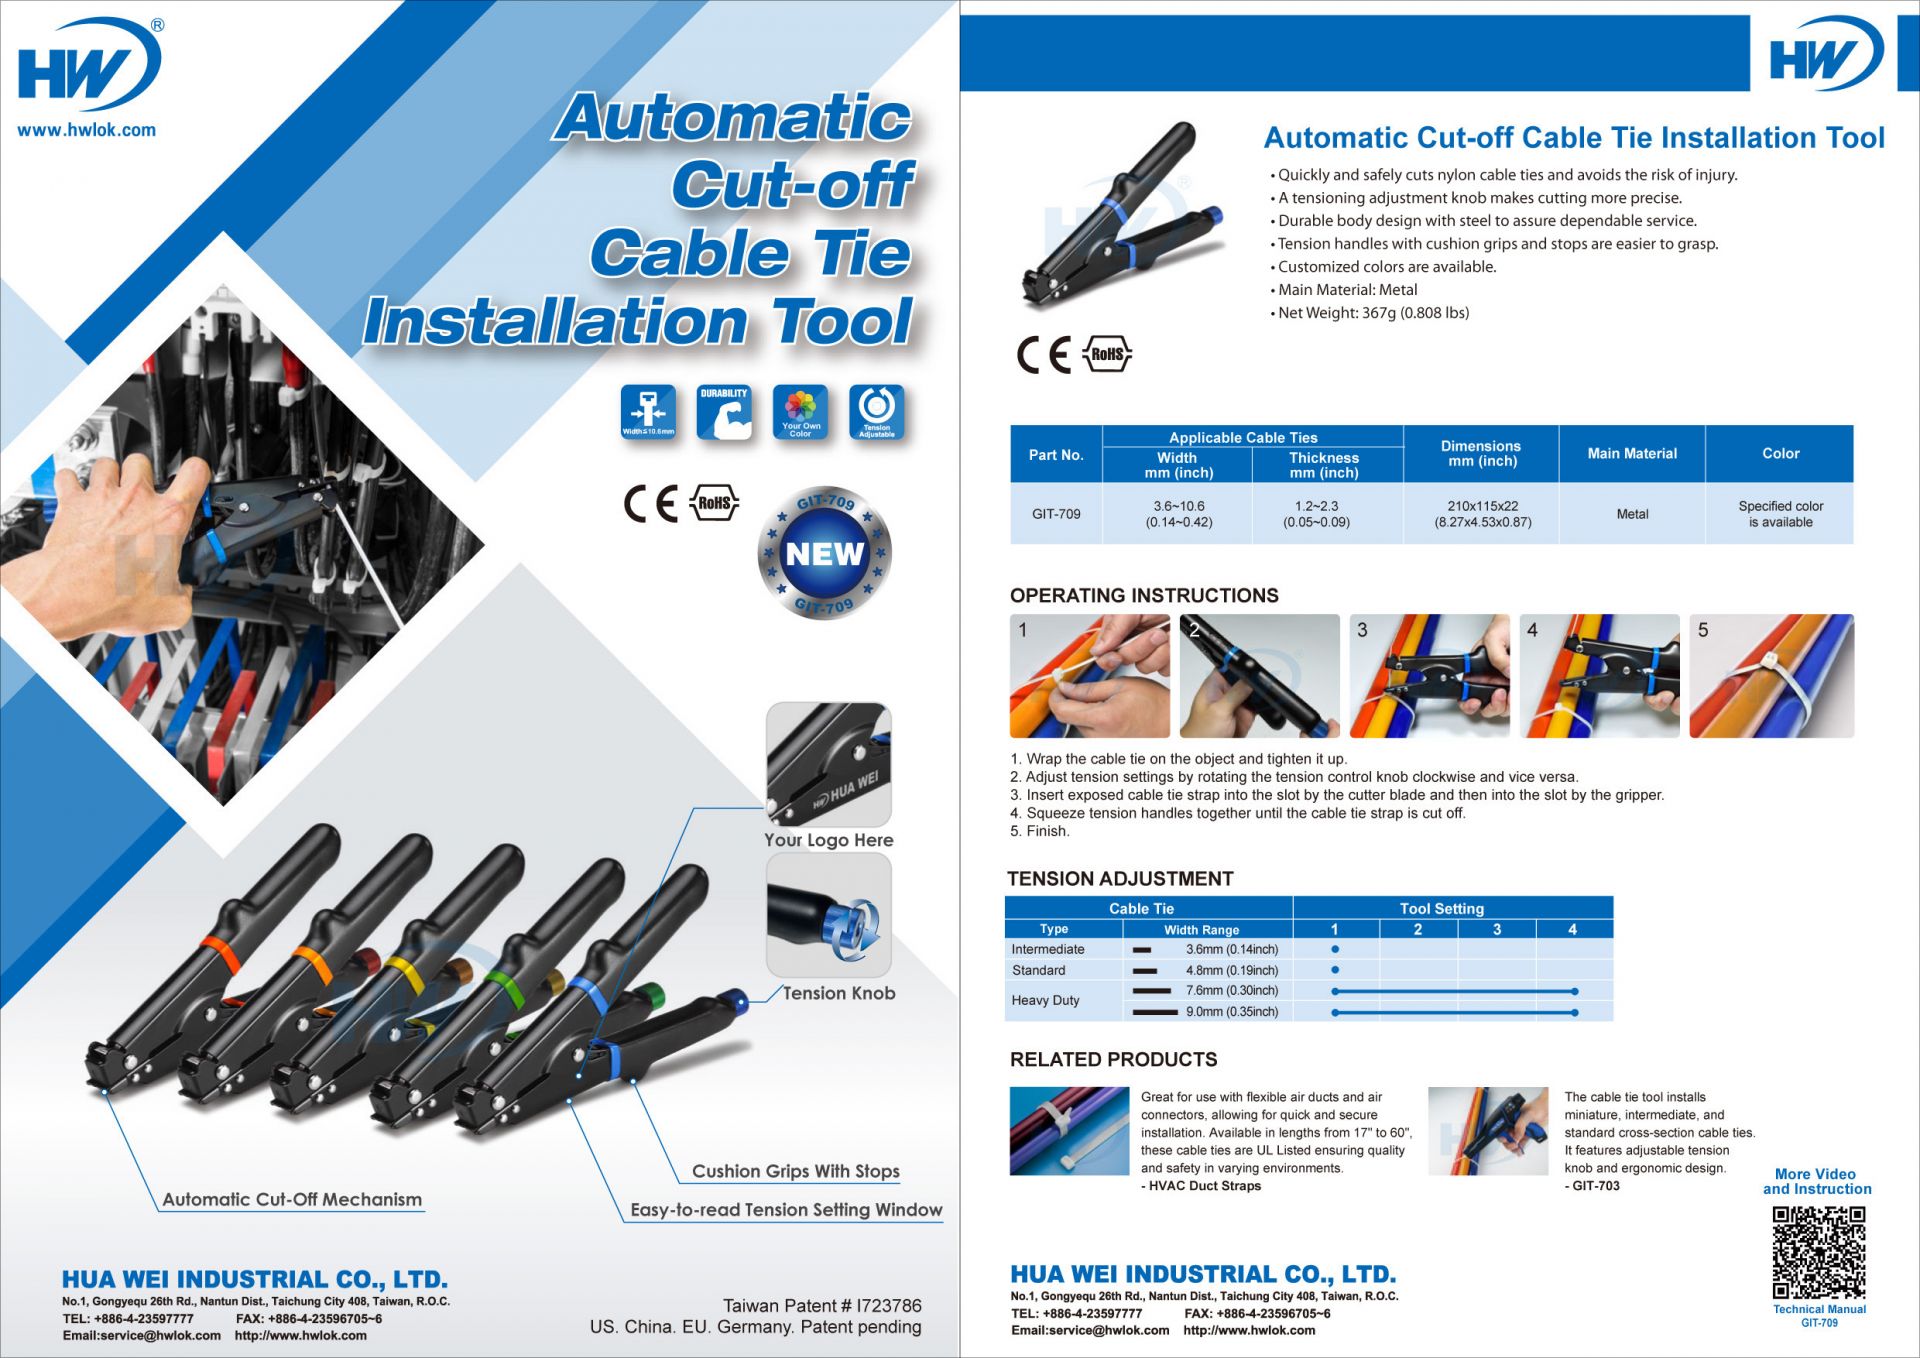 GIT-709- Automatic Cut-off Cable Tie Installation Tool - Flyer